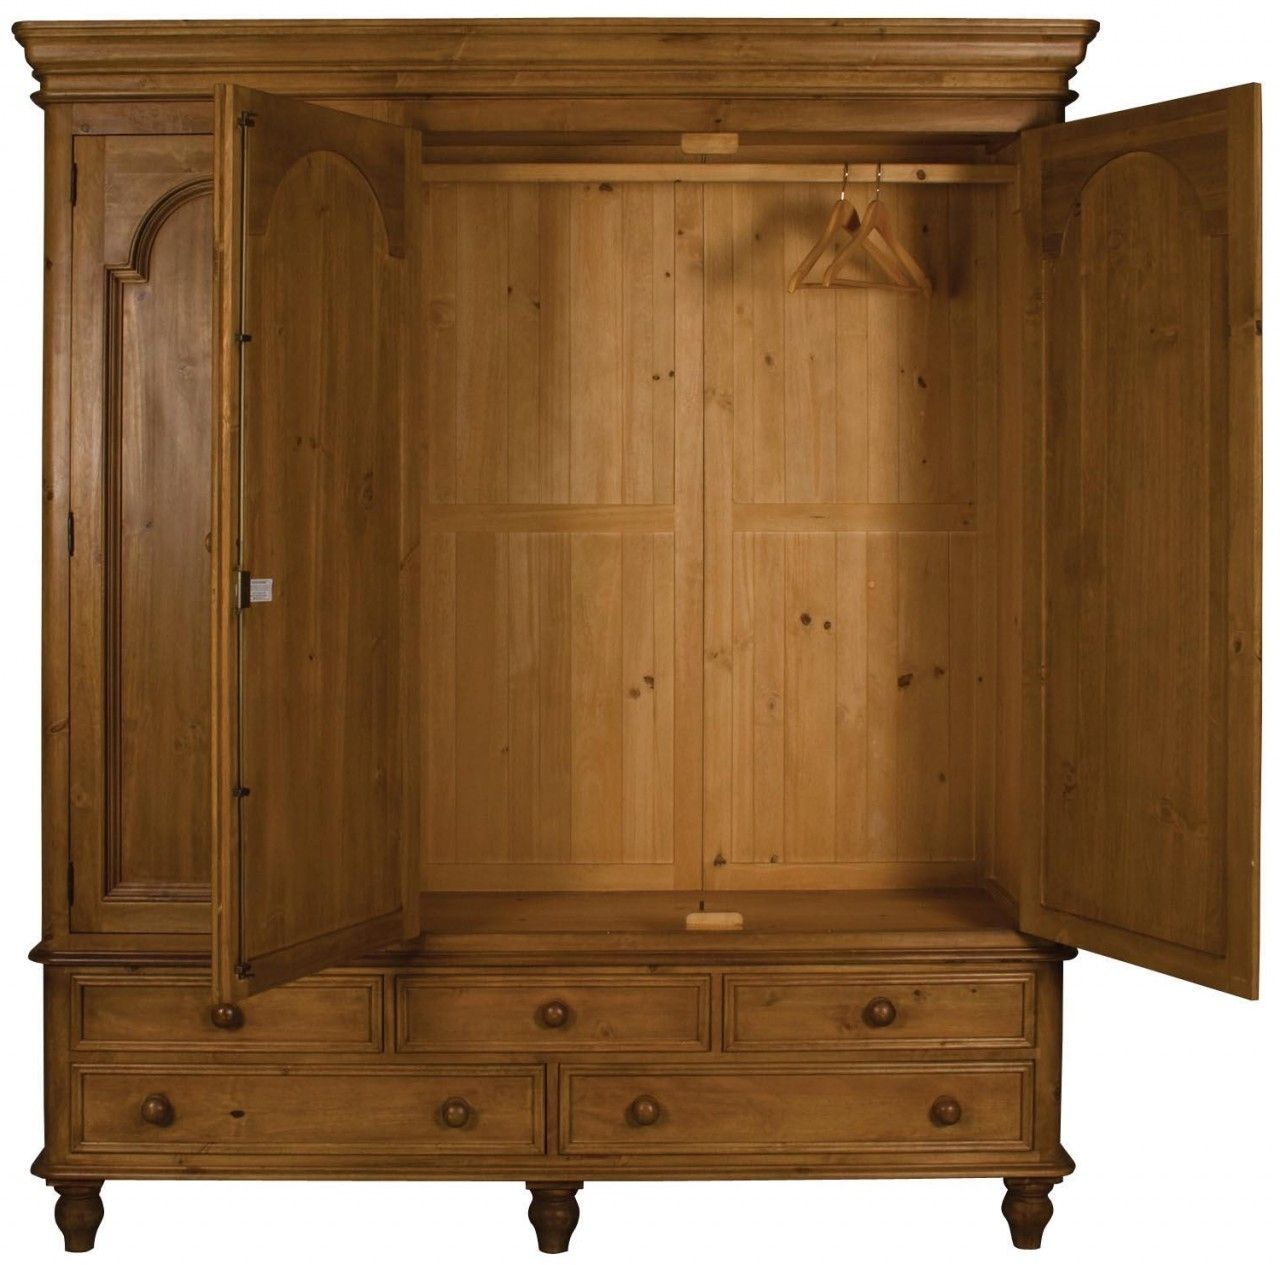 Solid Pine Bedroom Wardrobes, Solid Wooden Wardrobes, Single And Within Favorite Wooden Wardrobes (View 2 of 15)